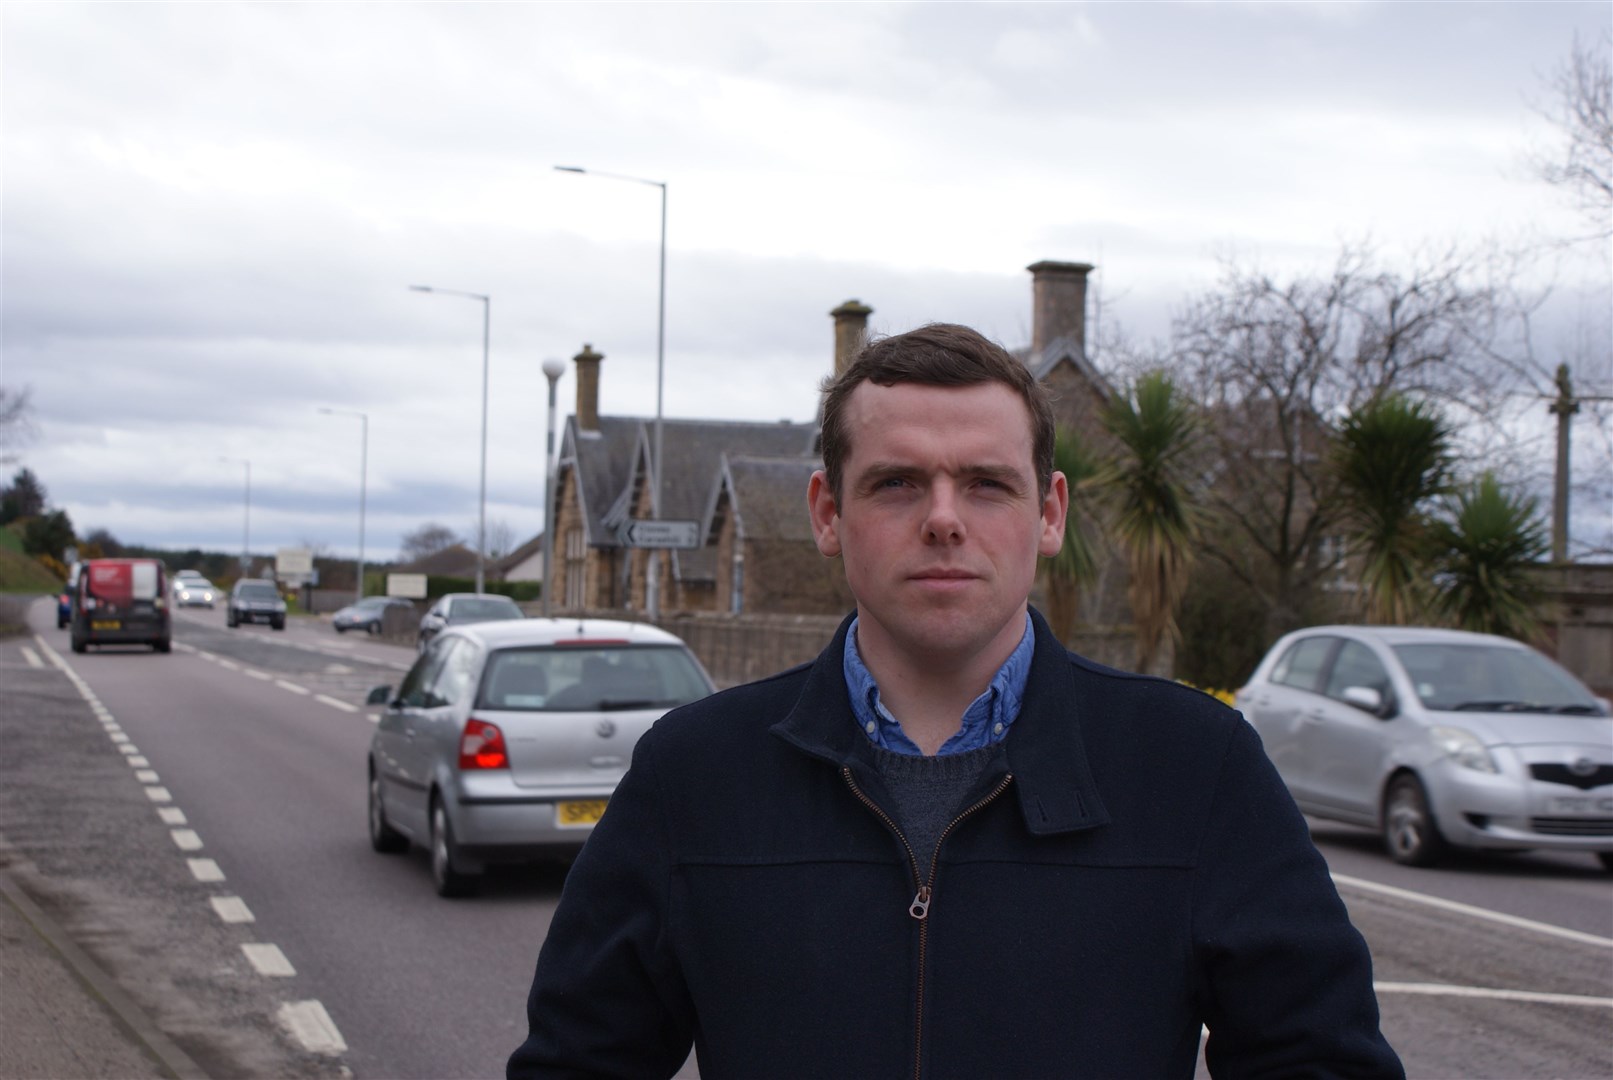 Douglas Ross MP will hold a live Facebook discussion on the Graduated Driving Licence proposals next week.